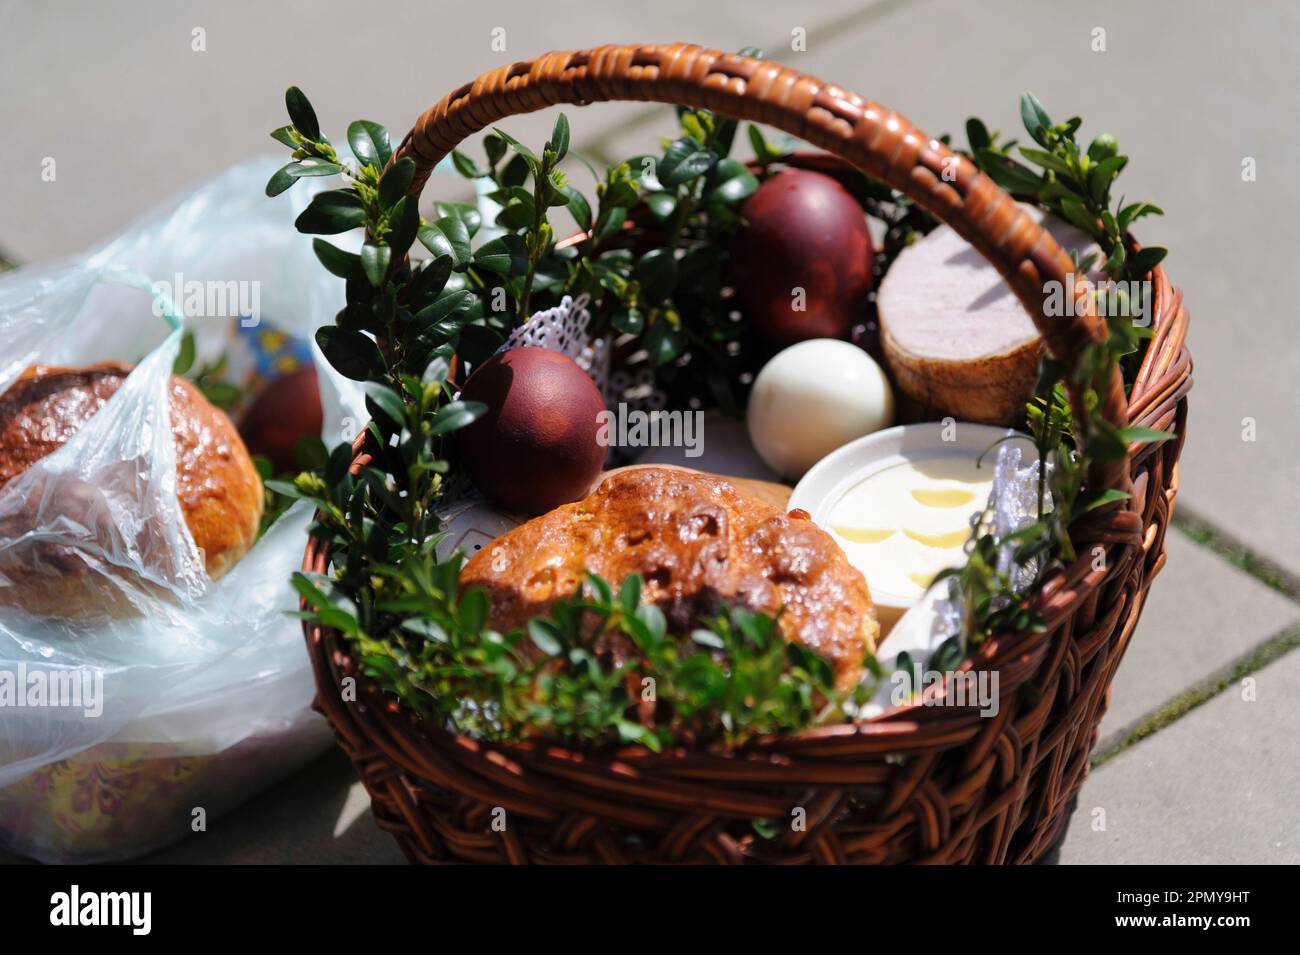 Lviv, Ukraine 15 April 2023. Easter basket seen before consecration at a Greek Catholic Church as they celebrate Easter to mark the resurrection of Jesus Christ from the dead and the foundation of the Christian faith. Stock Photo